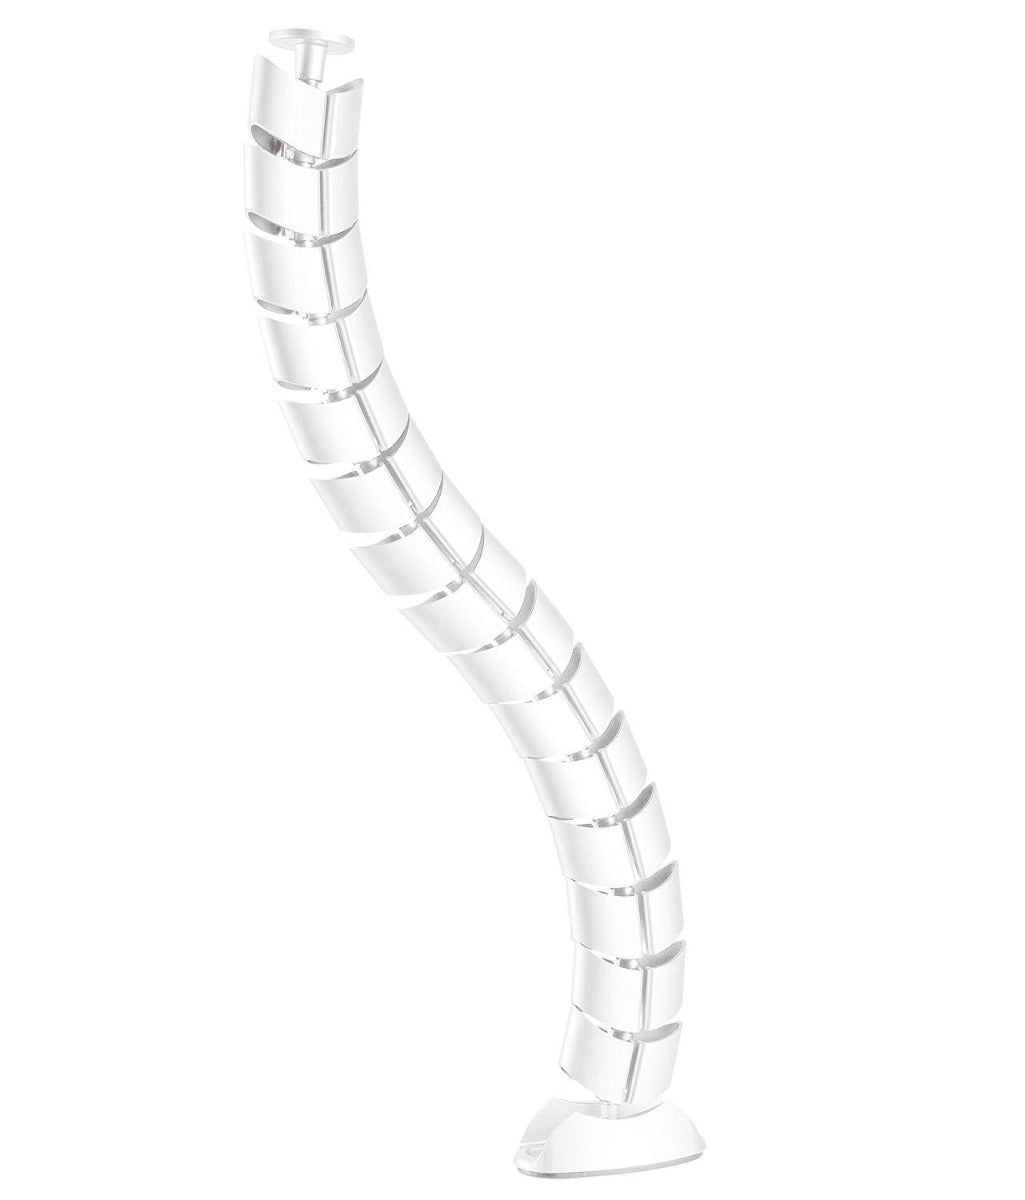 Cable Management Spine in White - OOF-P09 Near Me